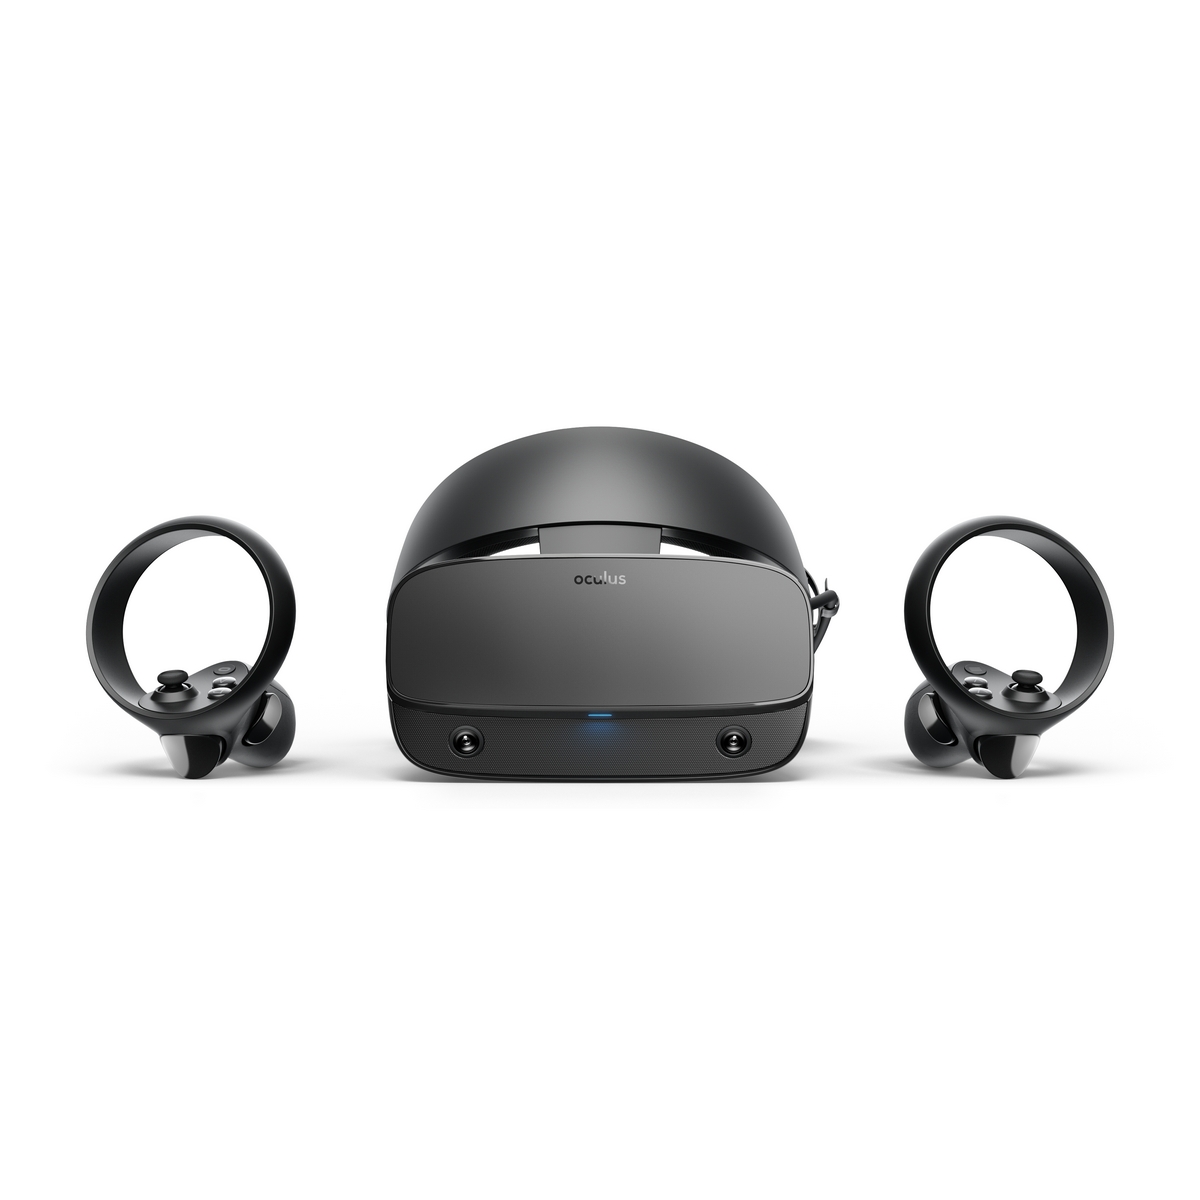 Oculus Rift Virtual Reality System - Headset and Controllers | OcUK